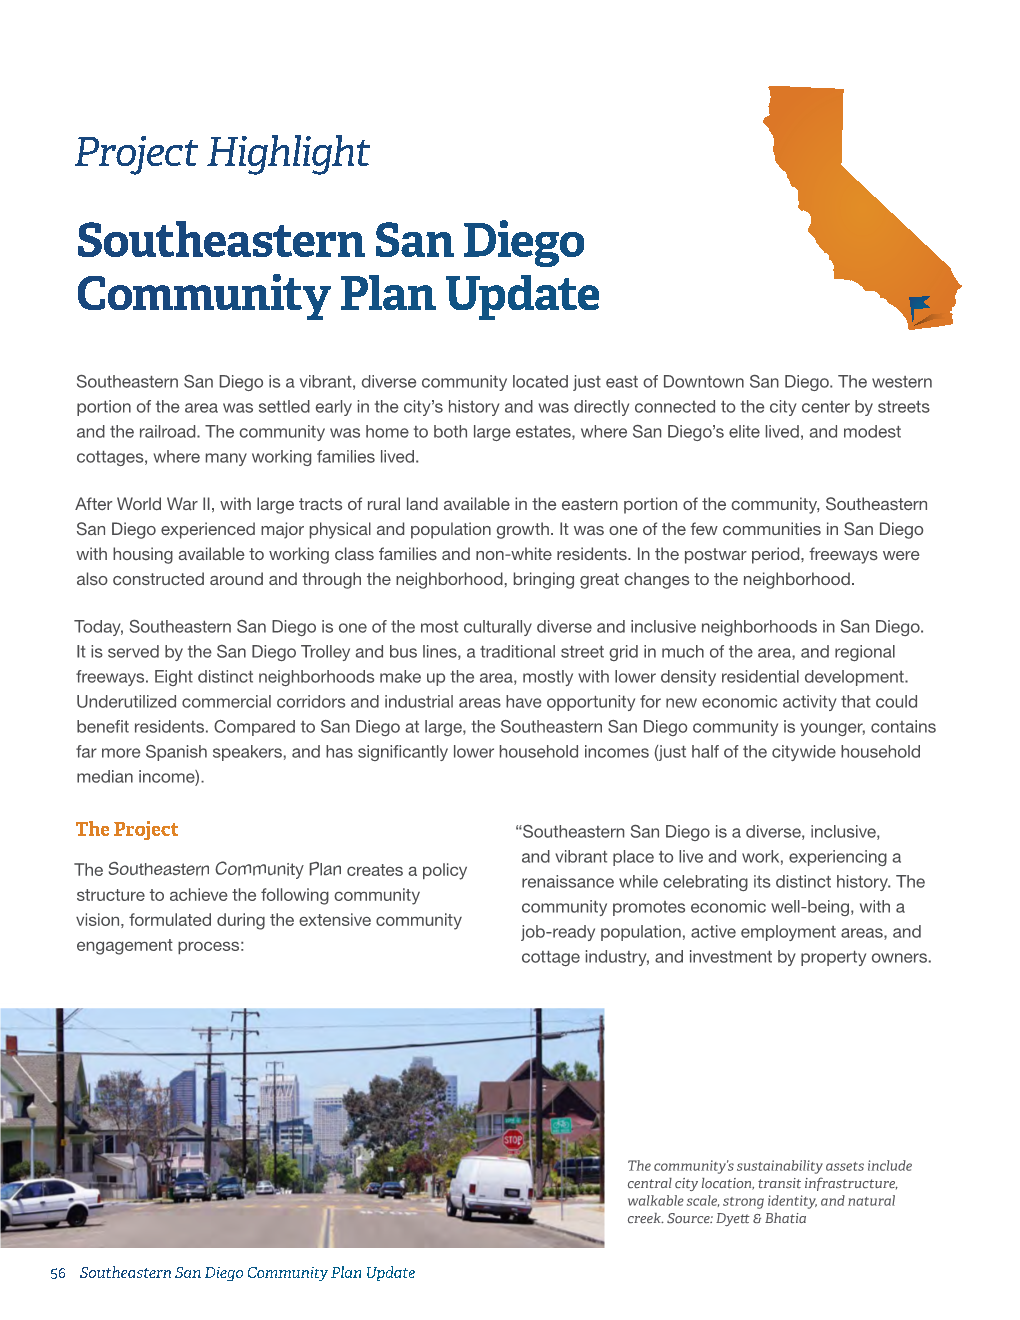 Project Highlight Southeastern San Diego Community Plan Update